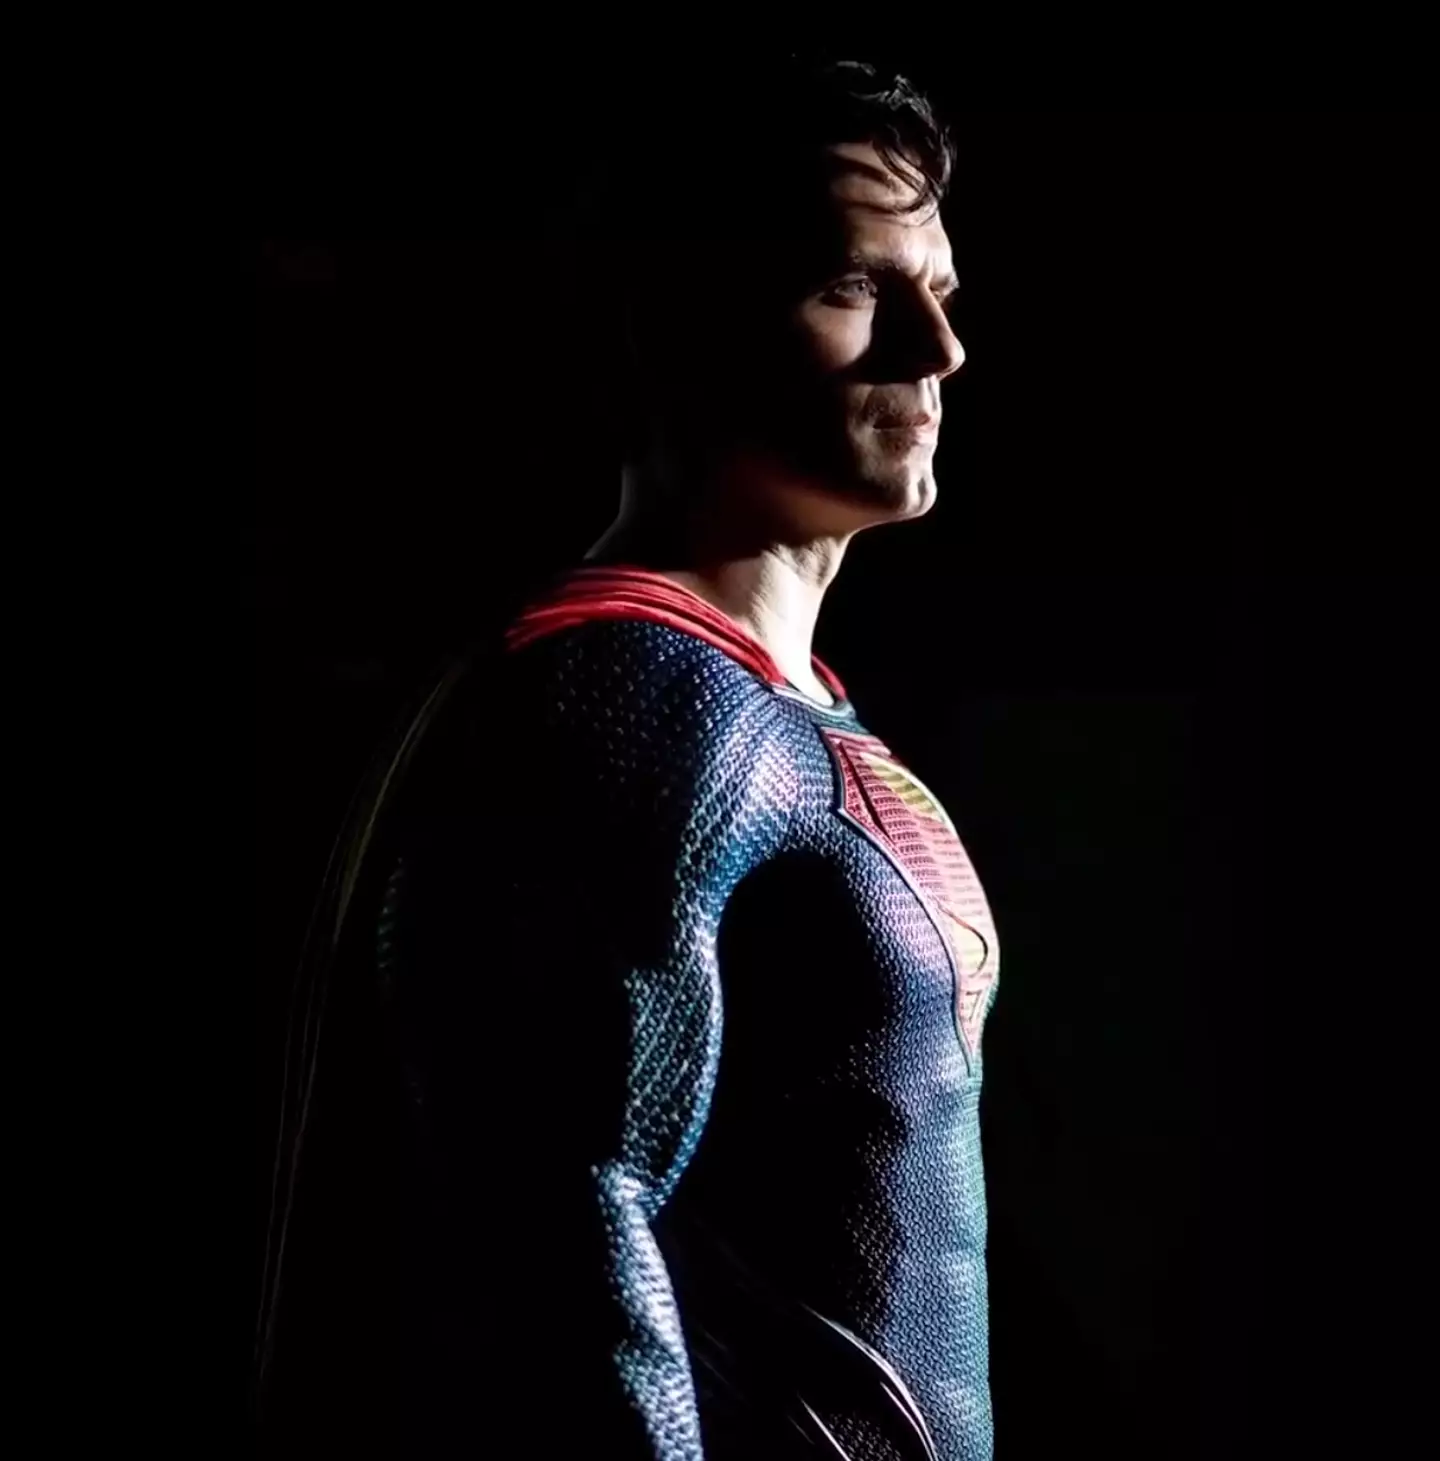 Henry Cavill has announced his return as Superman.